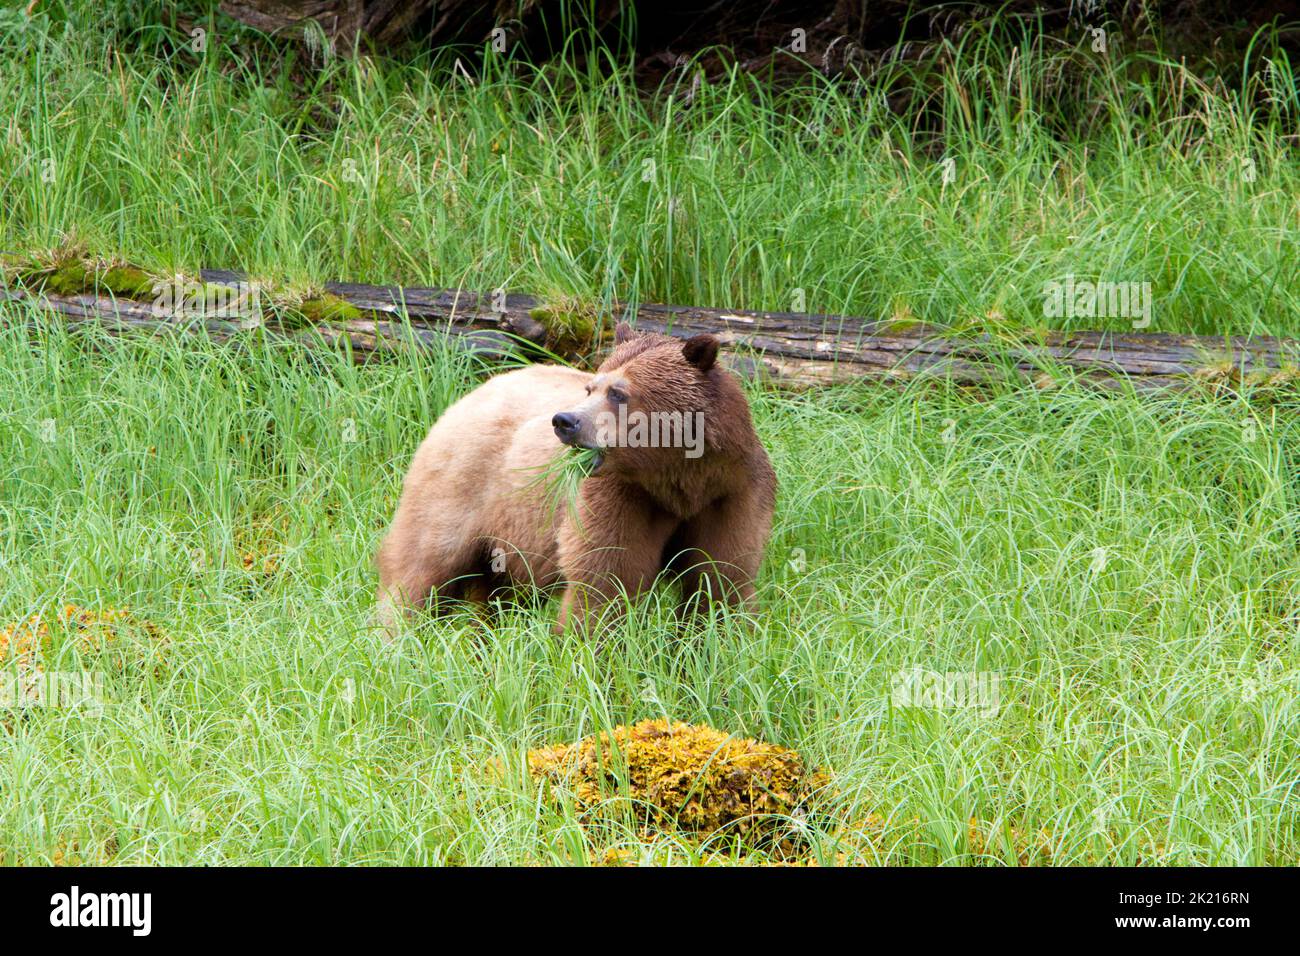 Grizzly Bear (Ursus arctos horribilis) feeding on grass along the banks of the Khutzeymateen Inlet north of Prince Rupert, BC, Canada in July Stock Photo